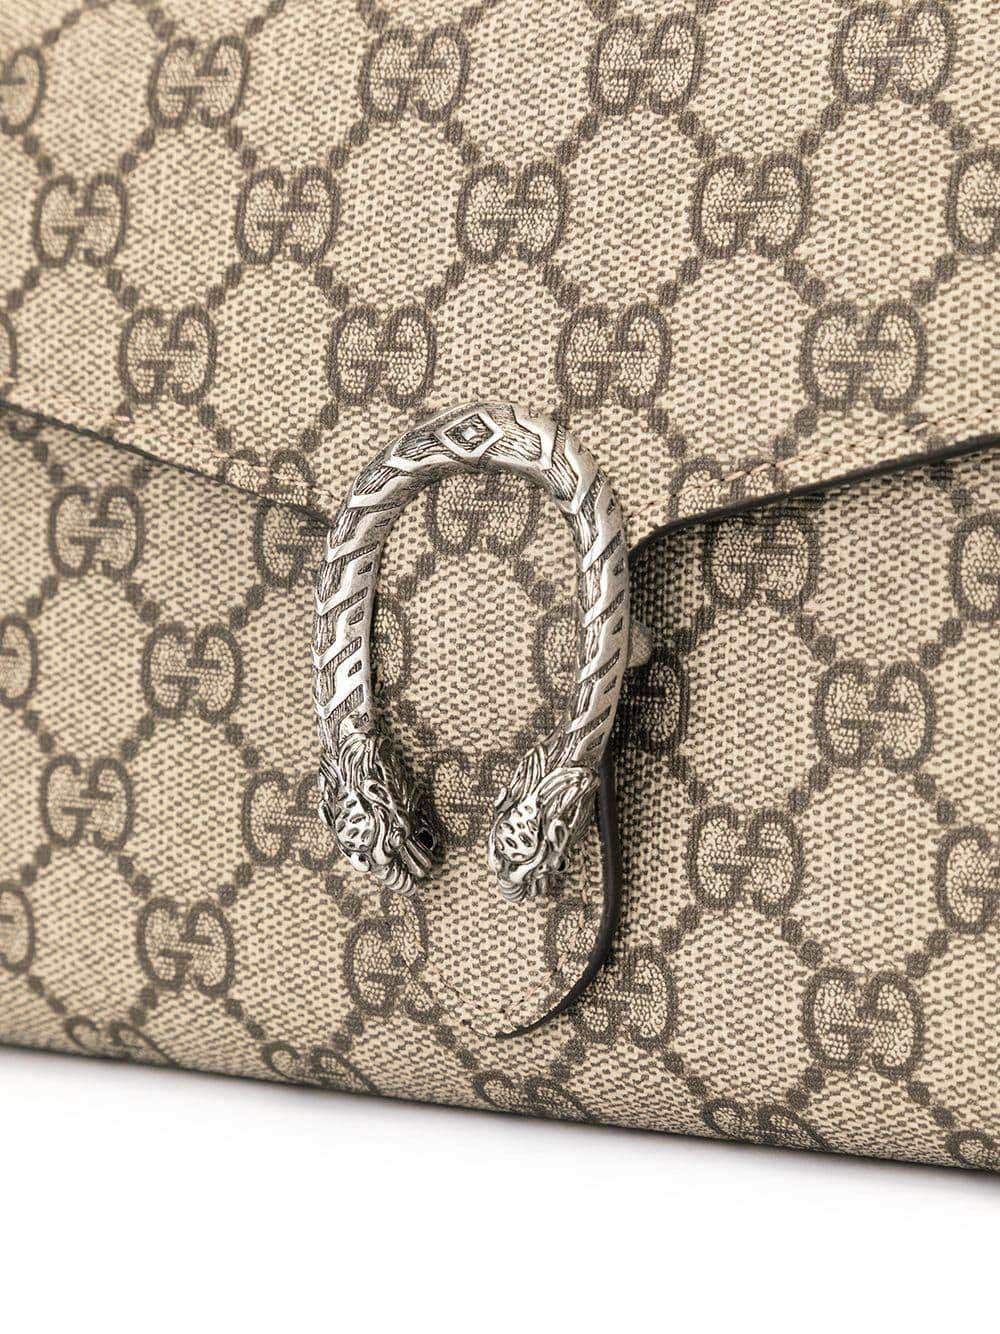 Gucci Dionysus GG Supreme Chain Wallet in Brown - Lyst